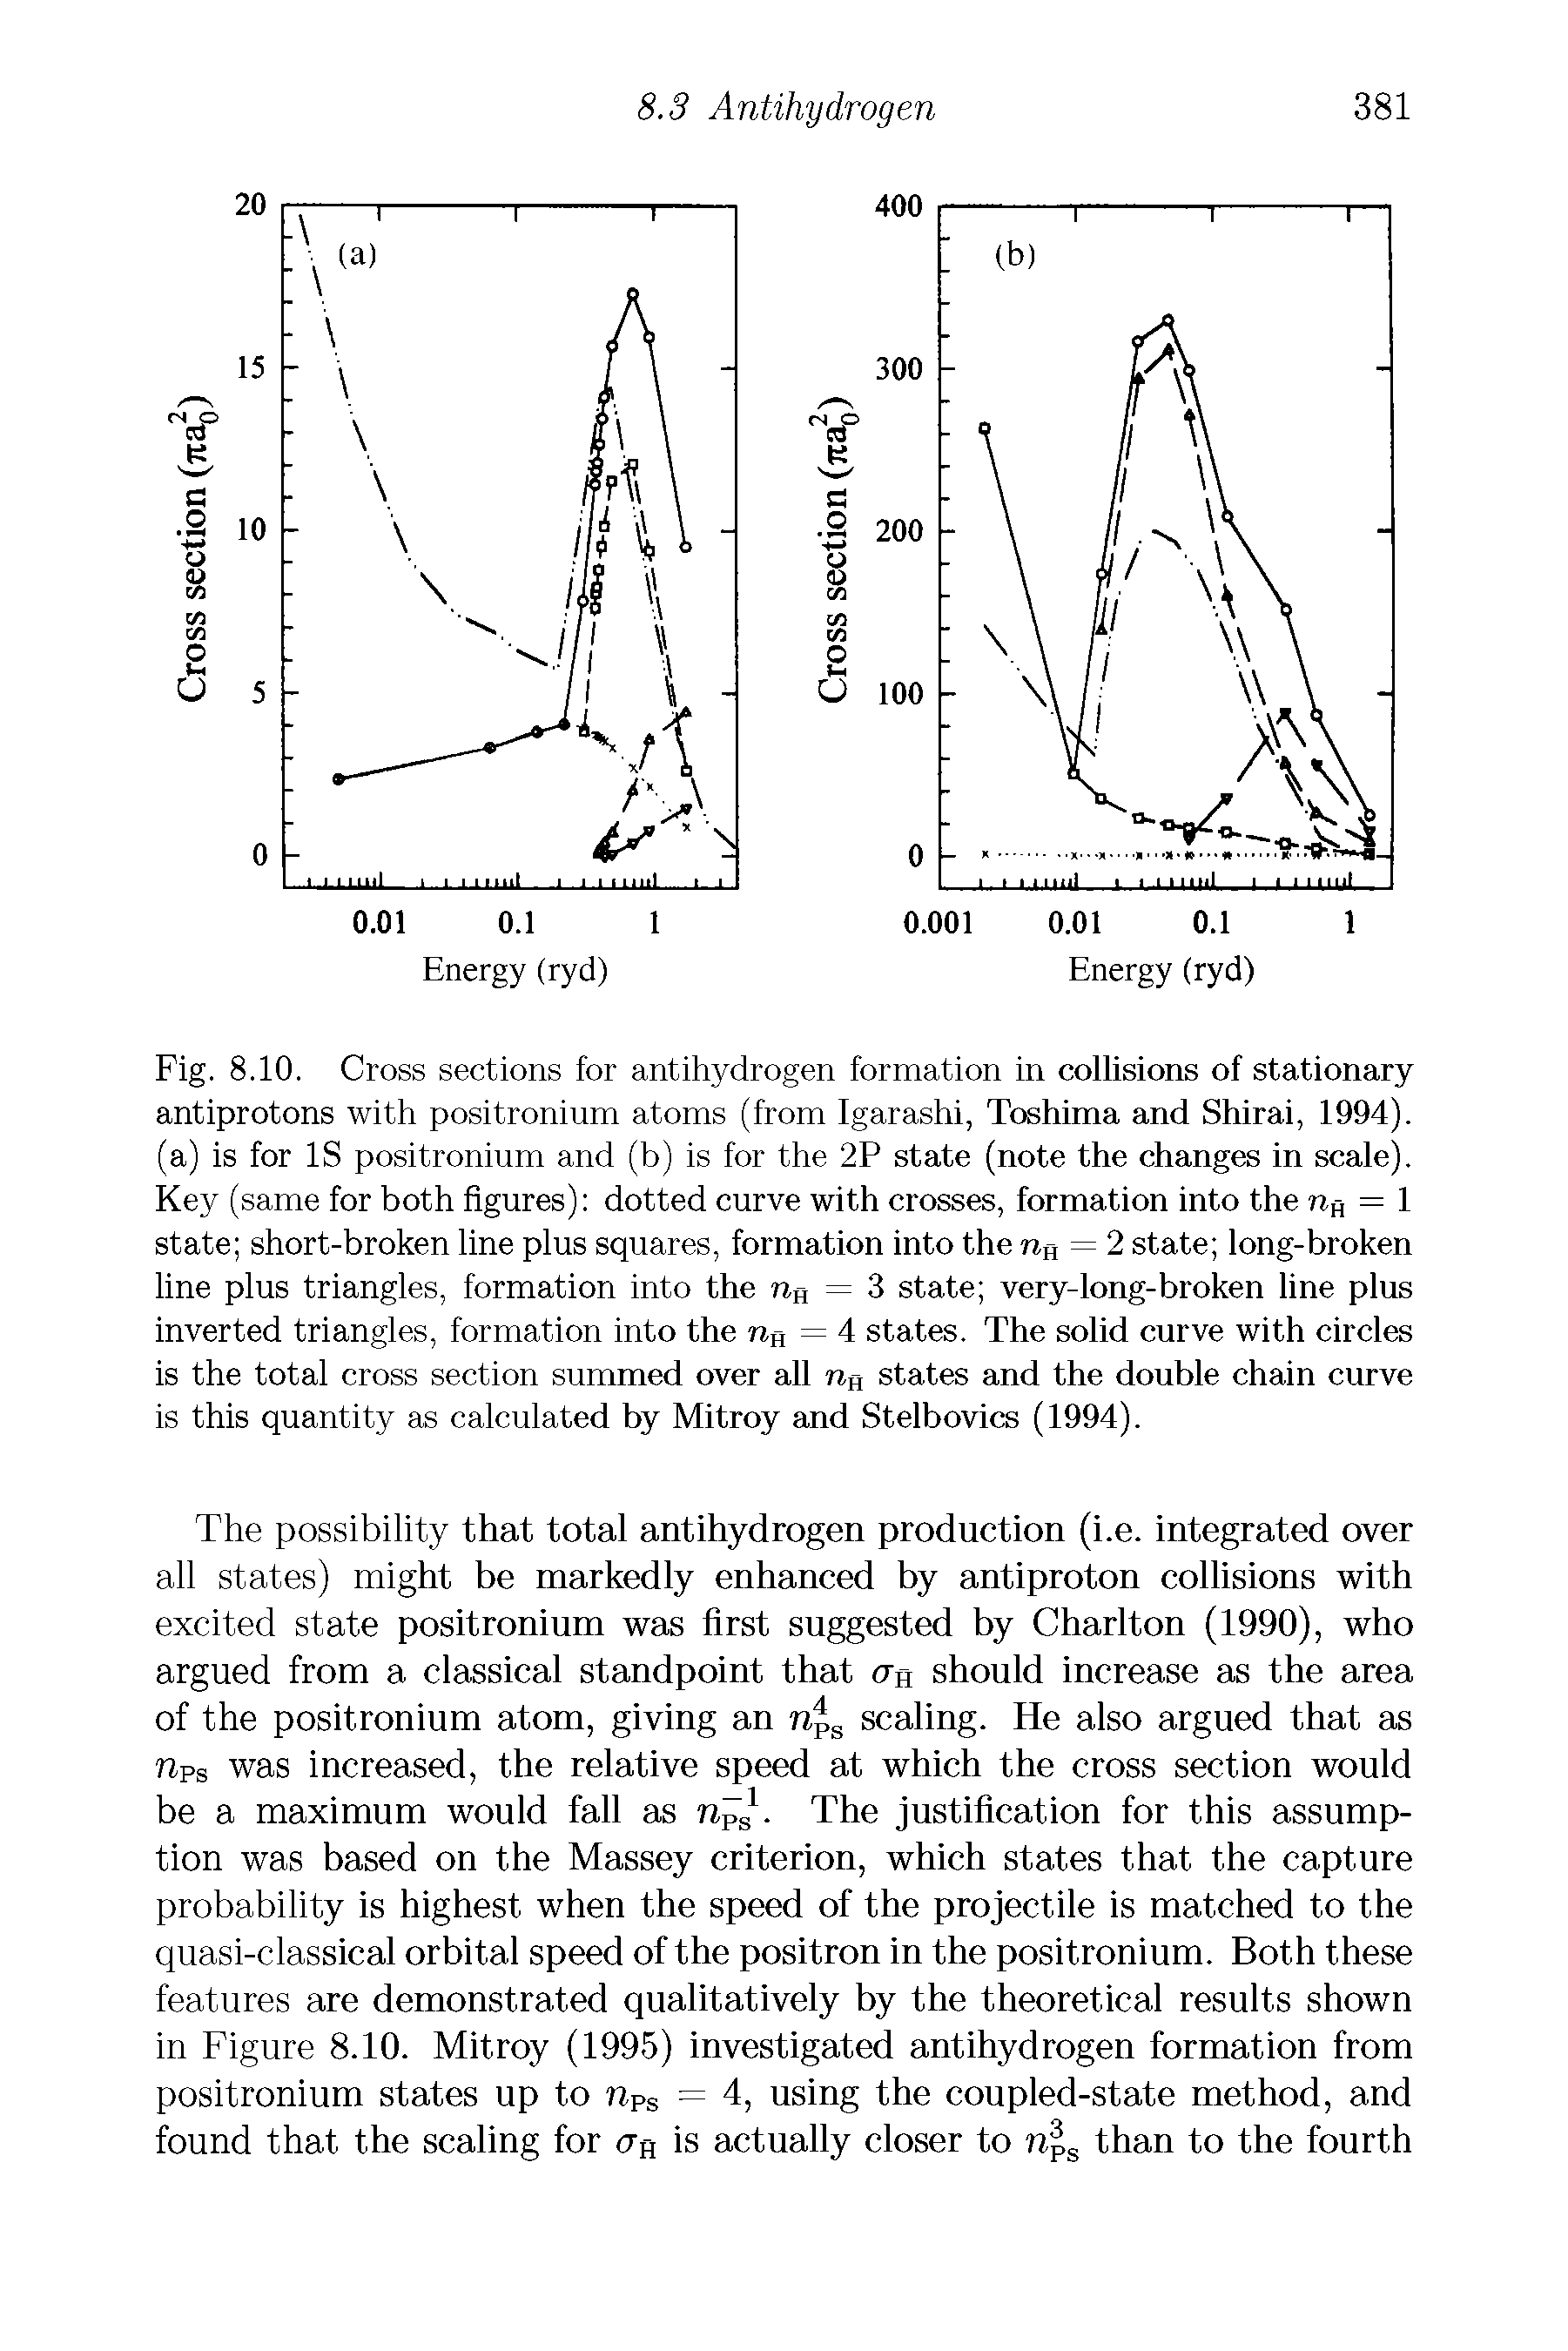 Fig. 8.10. Cross sections for antihydrogen formation in collisions of stationary antiprotons with positronium atoms (from Igarashi, Toshima and Shirai, 1994). (a) is for IS positronium and (b) is for the 2P state (note the changes in scale). Key (same for both figures) dotted curve with crosses, formation into the nfl = 1 state short-broken line plus squares, formation into the ns = 2 state long-broken line plus triangles, formation into the nn = 3 state very-long-broken line plus inverted triangles, formation into the ns = 4 states. The solid curve with circles is the total cross section summed over all ns states and the double chain curve is this quantity as calculated by Mitroy and Stelbovics (1994).